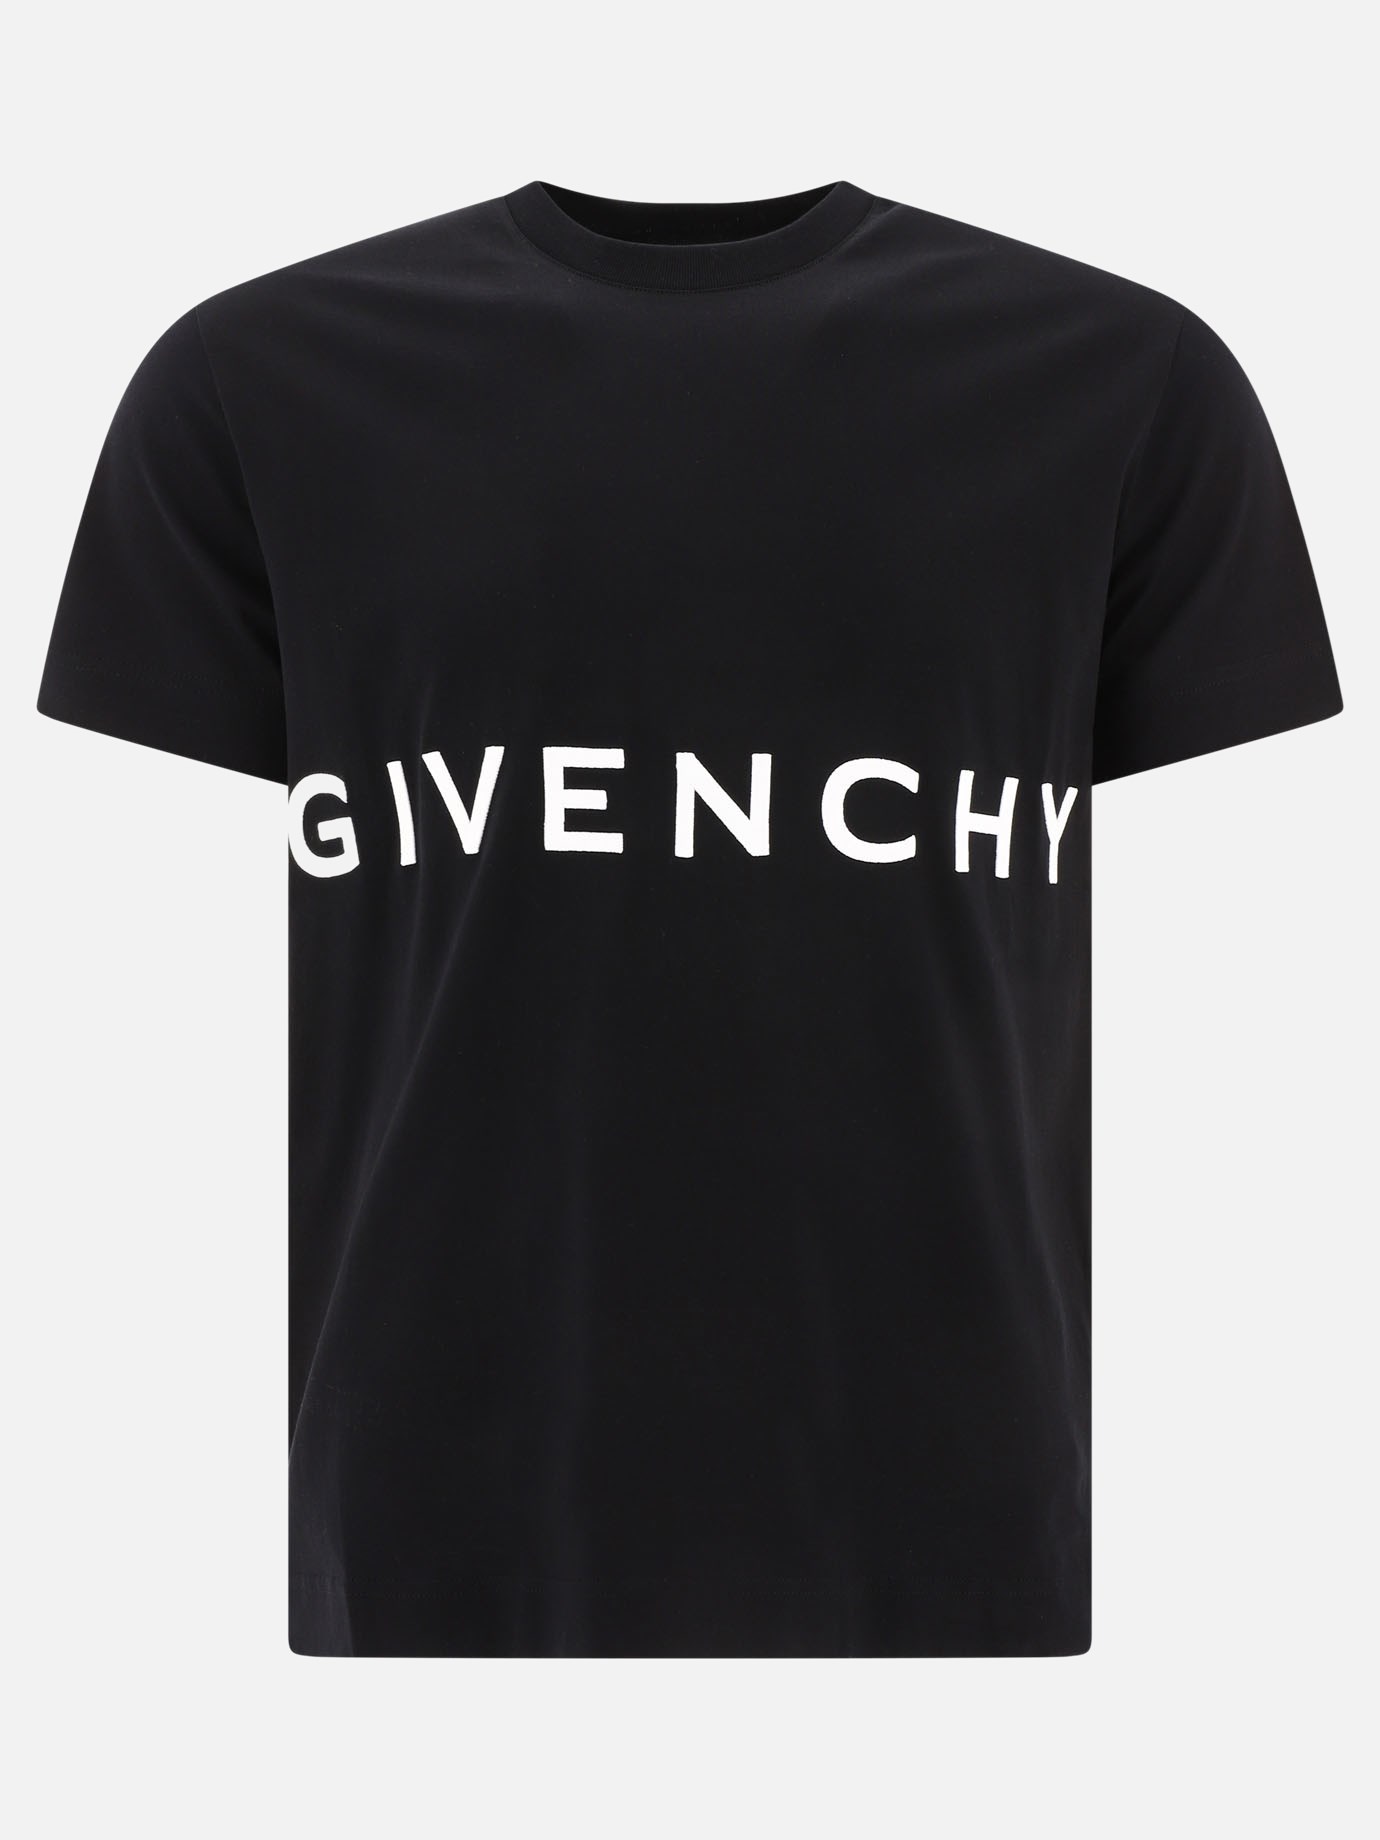  Givenchy 4G  t-shirtby Givenchy - 5